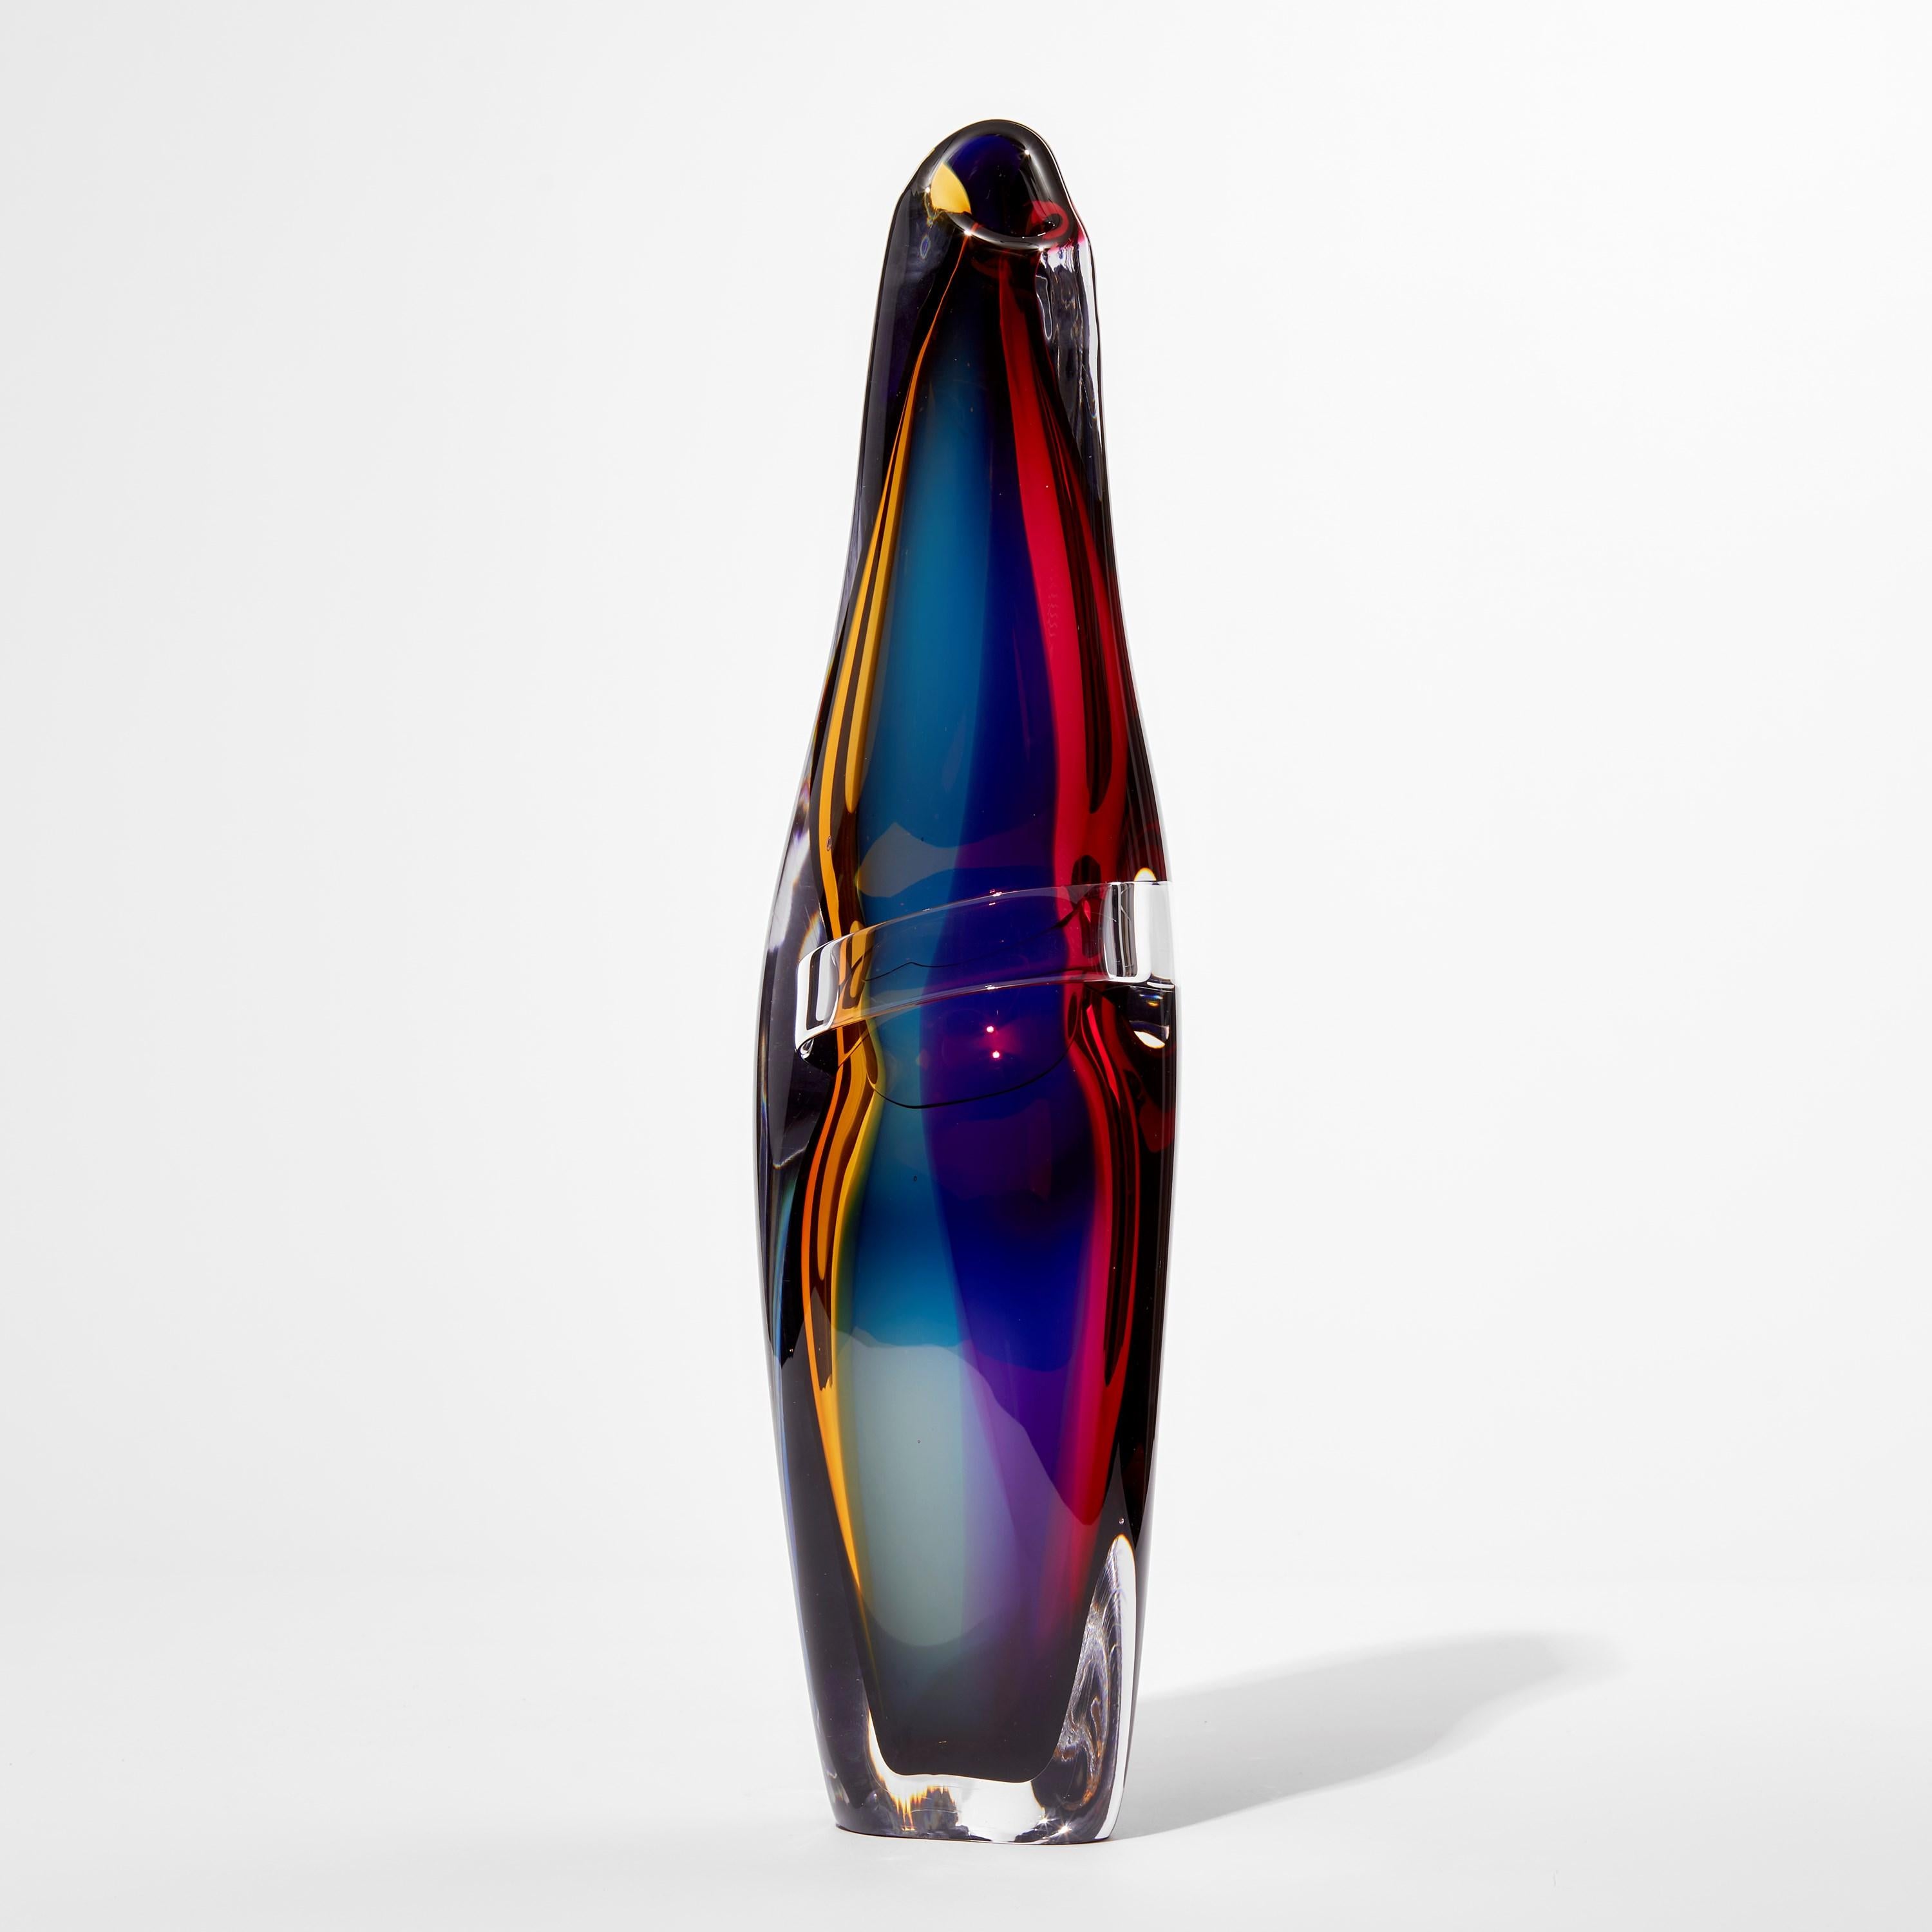 'Tricolarial 37' is a unique hand blown sculptural vase by the British artist Vic Bamforth. Blown in amber, red, purple and blue colored glass which are encased in clear glass to create this stunning piece. With soft, twisting lines, the form has